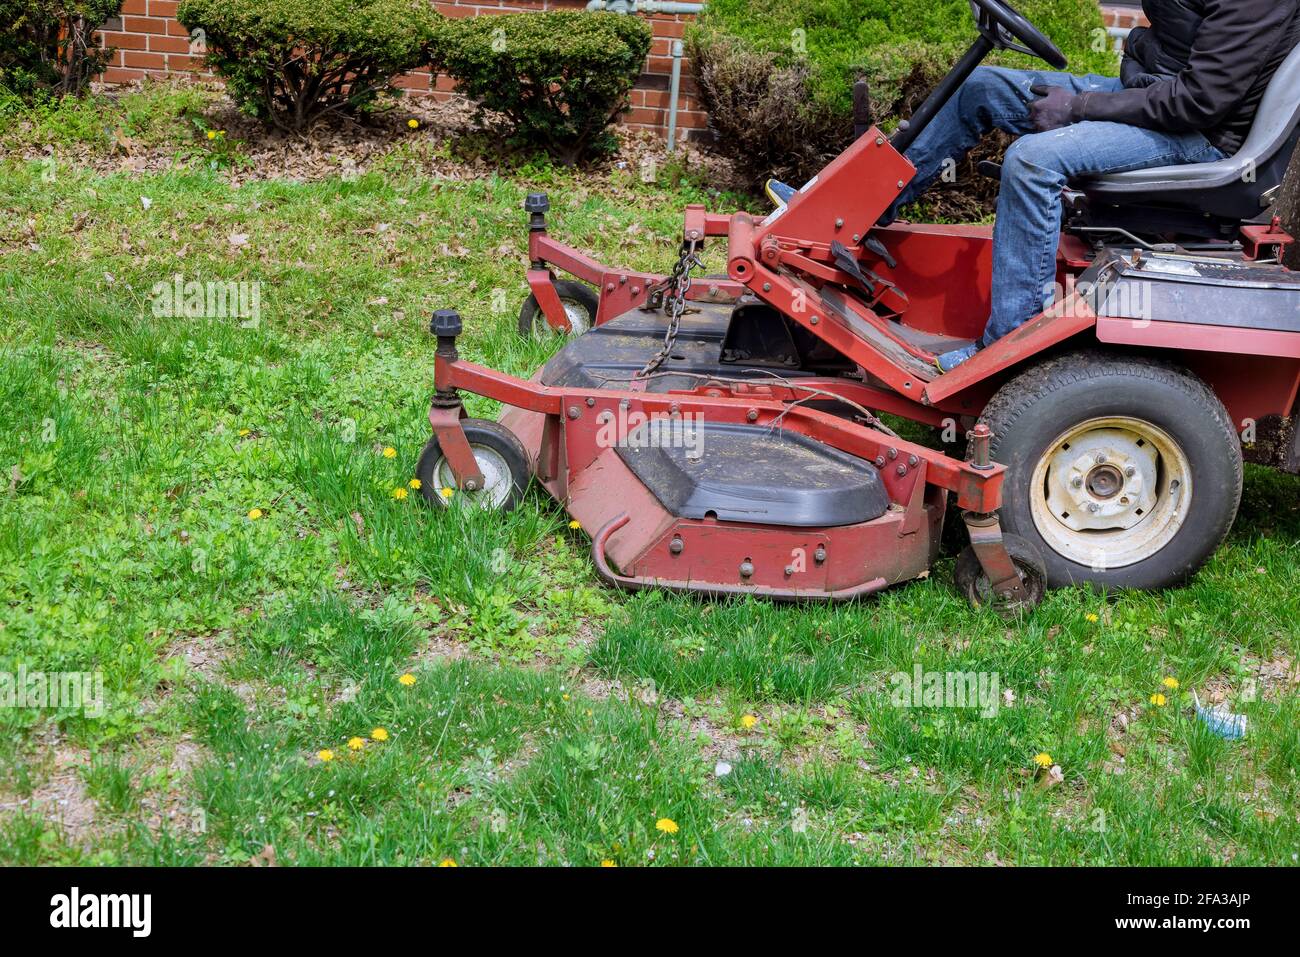 Utility worker in lawn mower gardener cutting the grass ride-on lawnmower Stock Photo